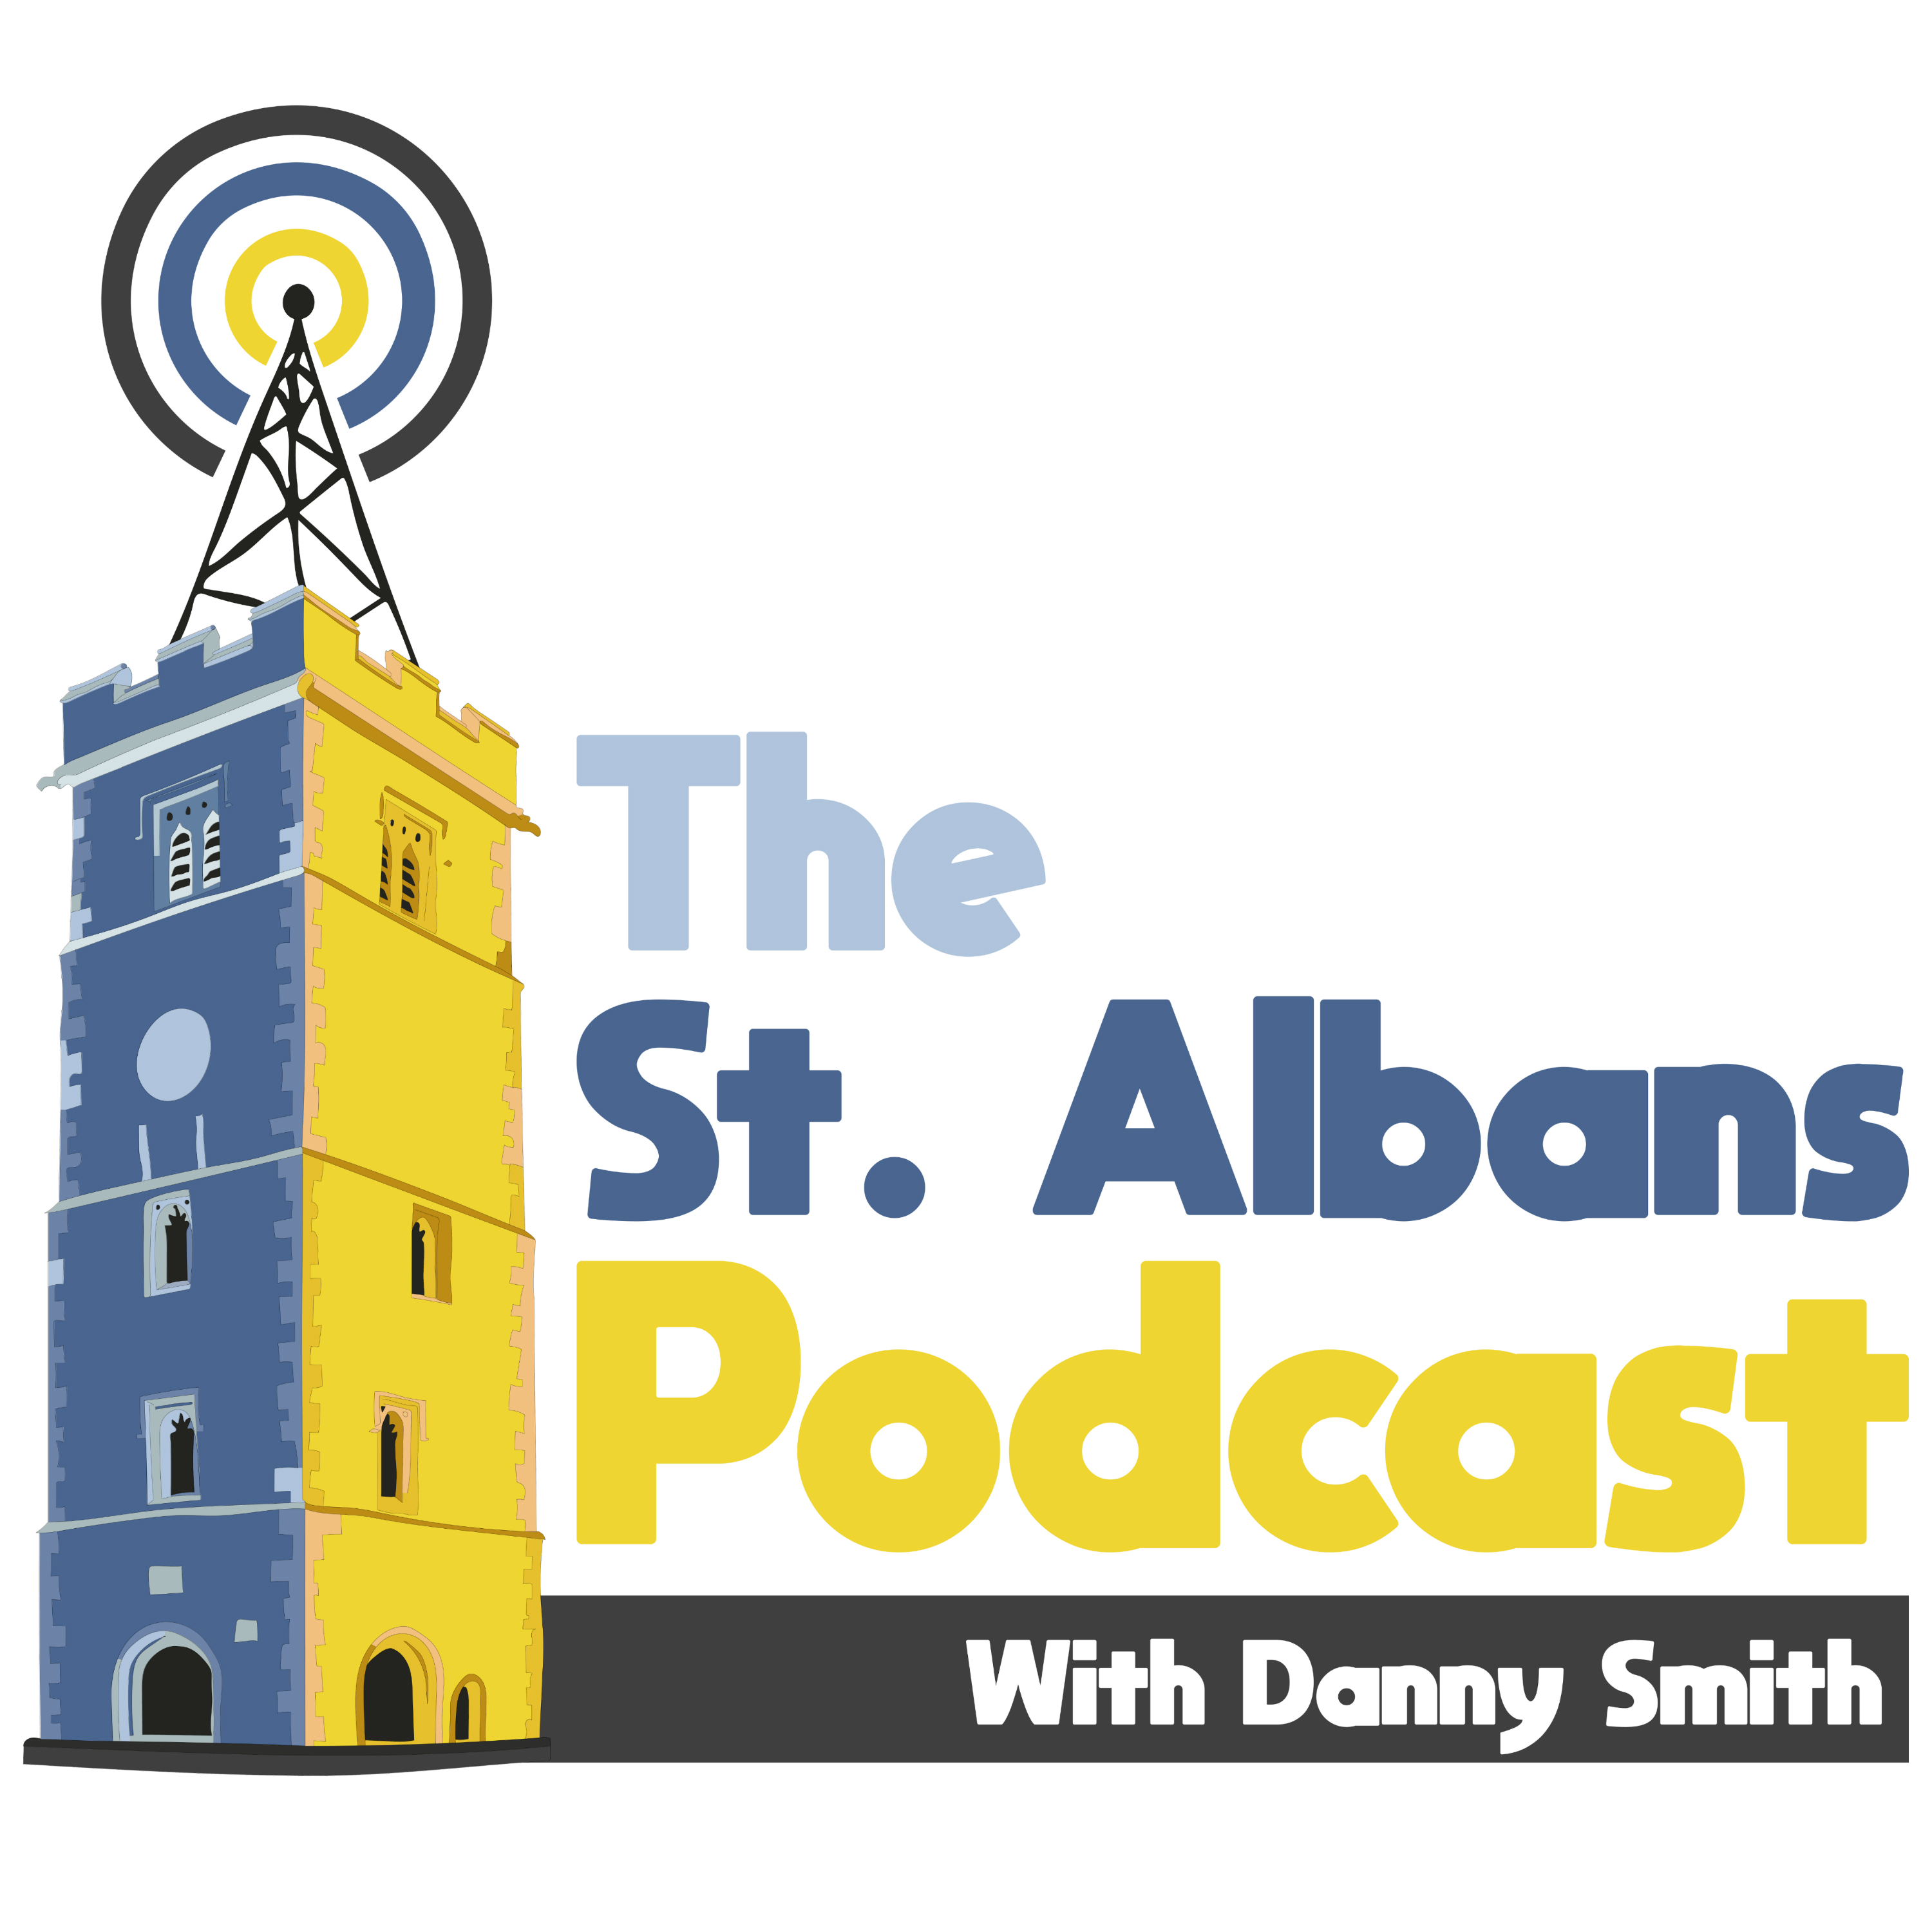 St Albans Podcast with Danny Smith